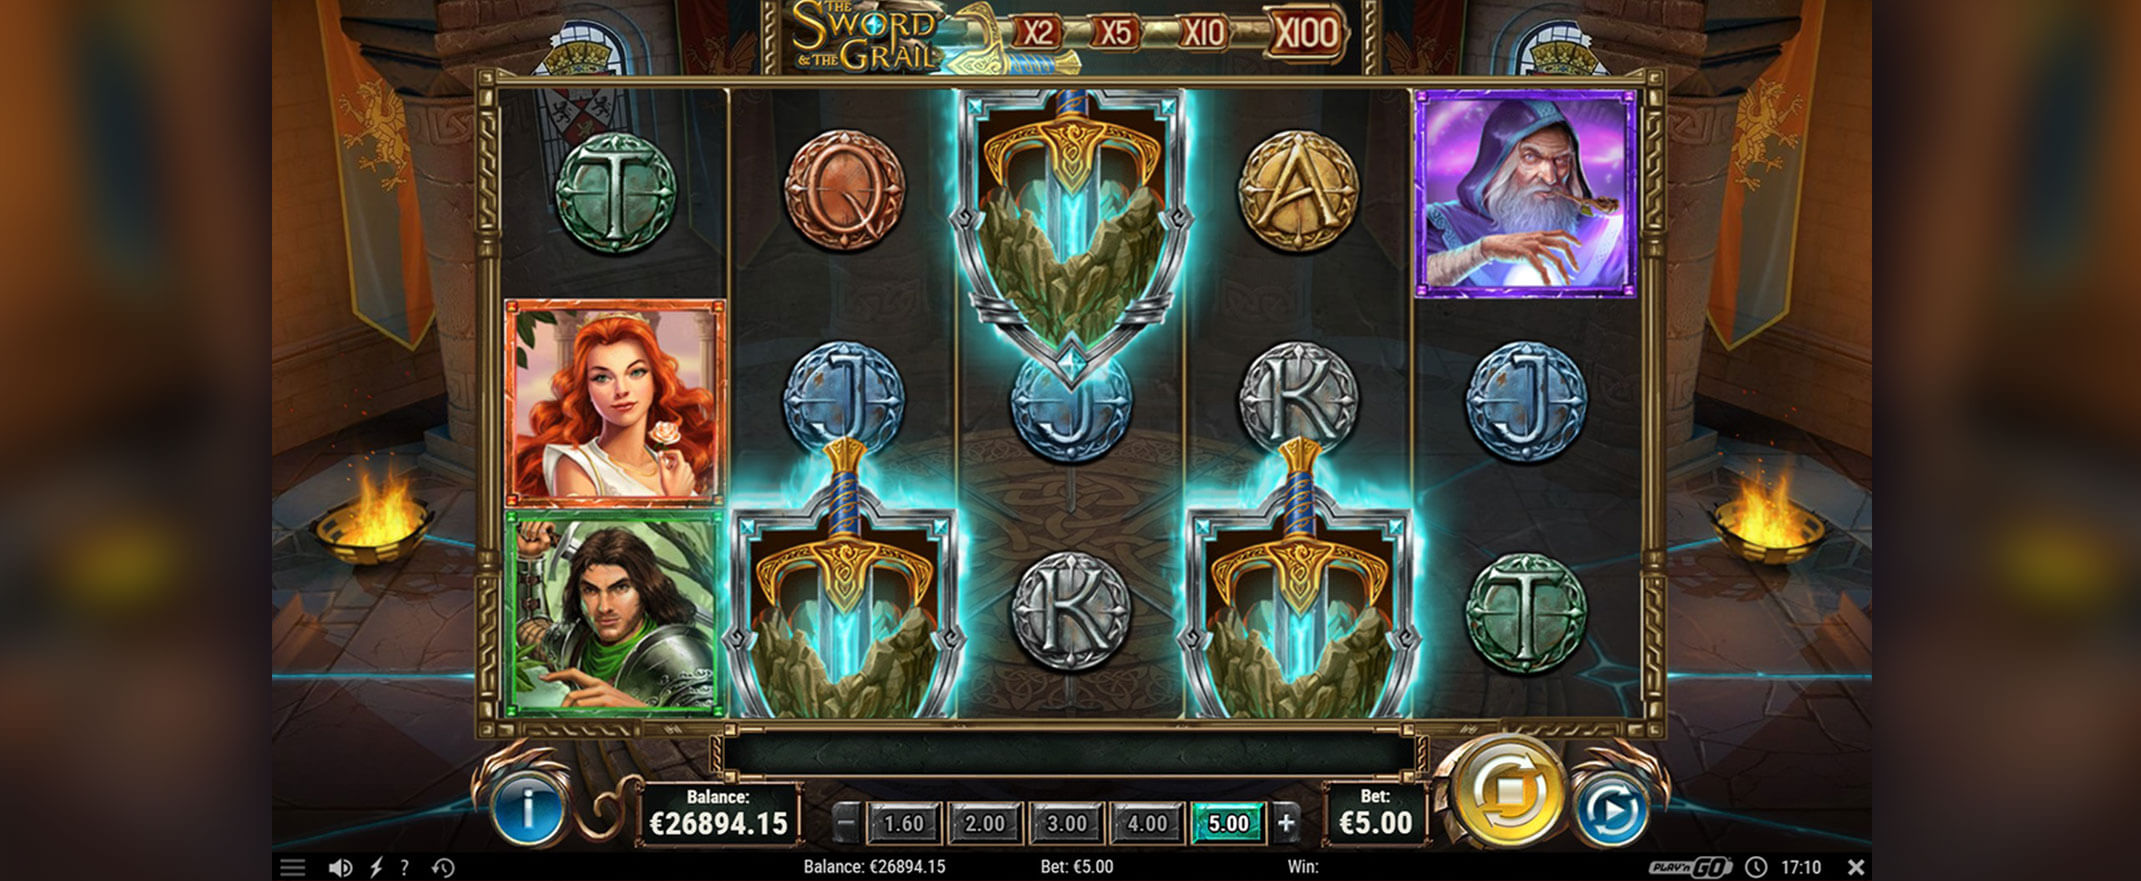 The Sword and The Grail slot from Play'n Go